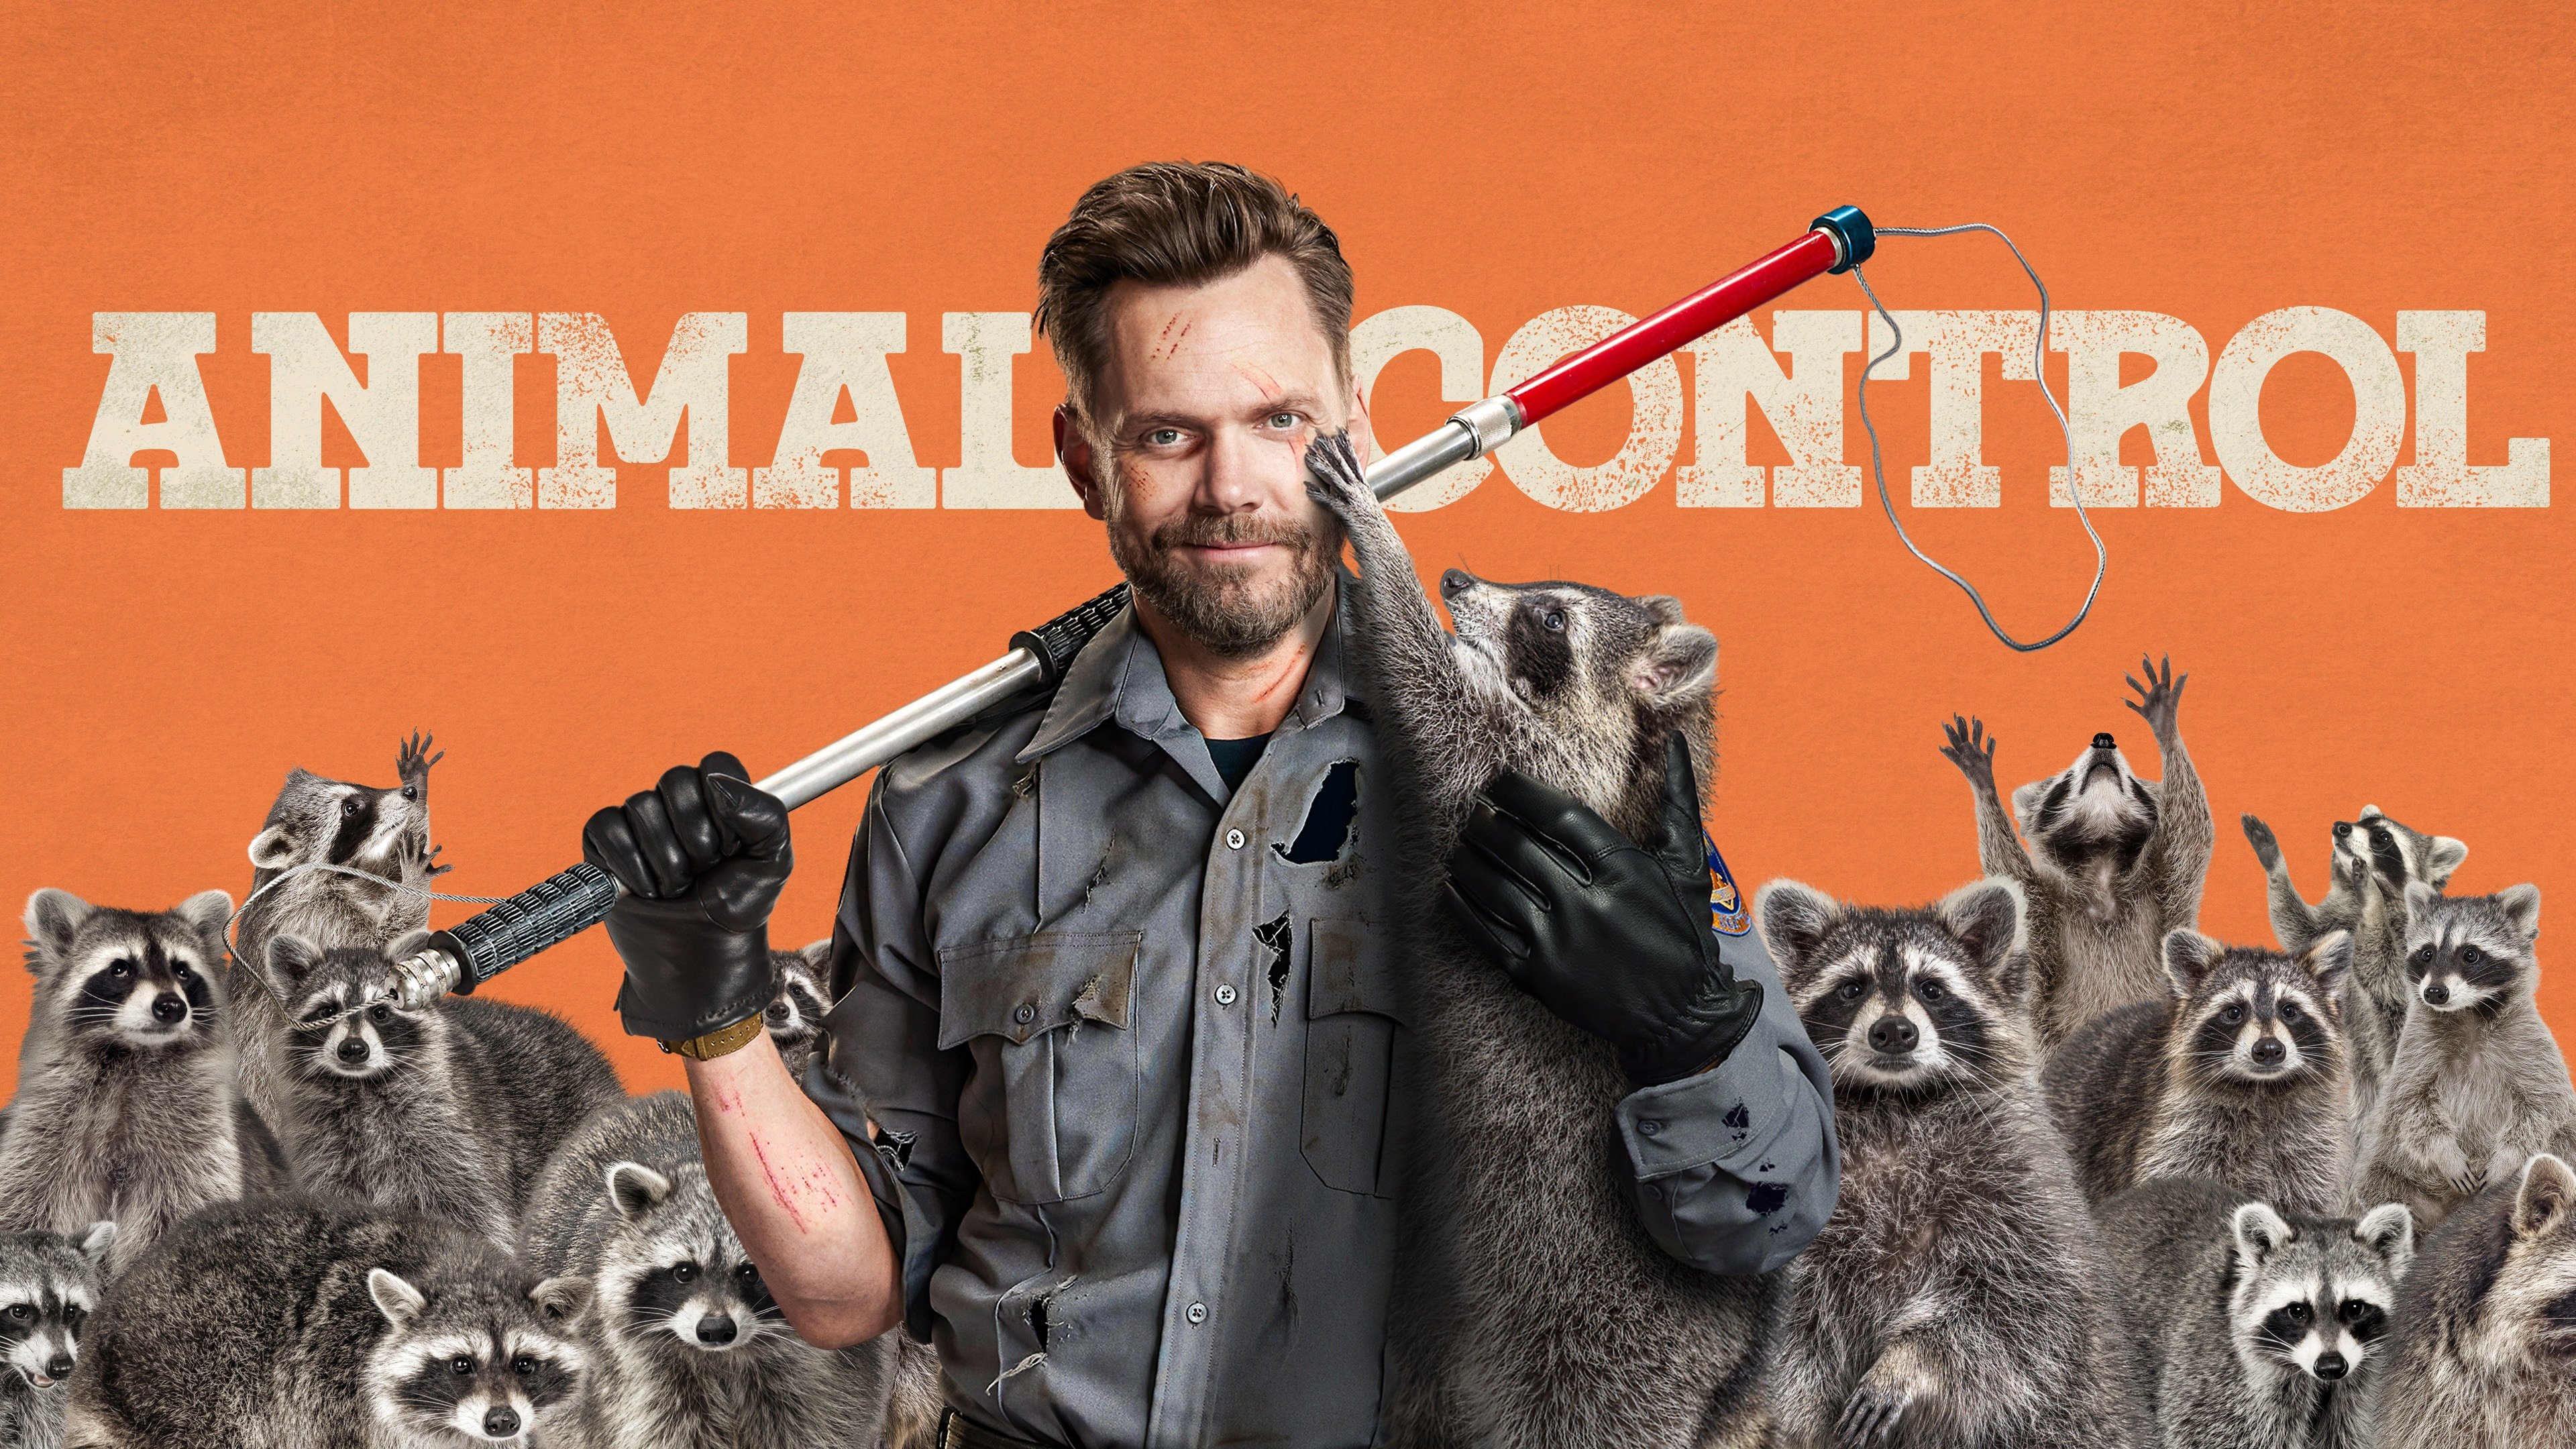 Animal Control Season 1 Episode 3 Watch Online Free Streaming 2 March 2023